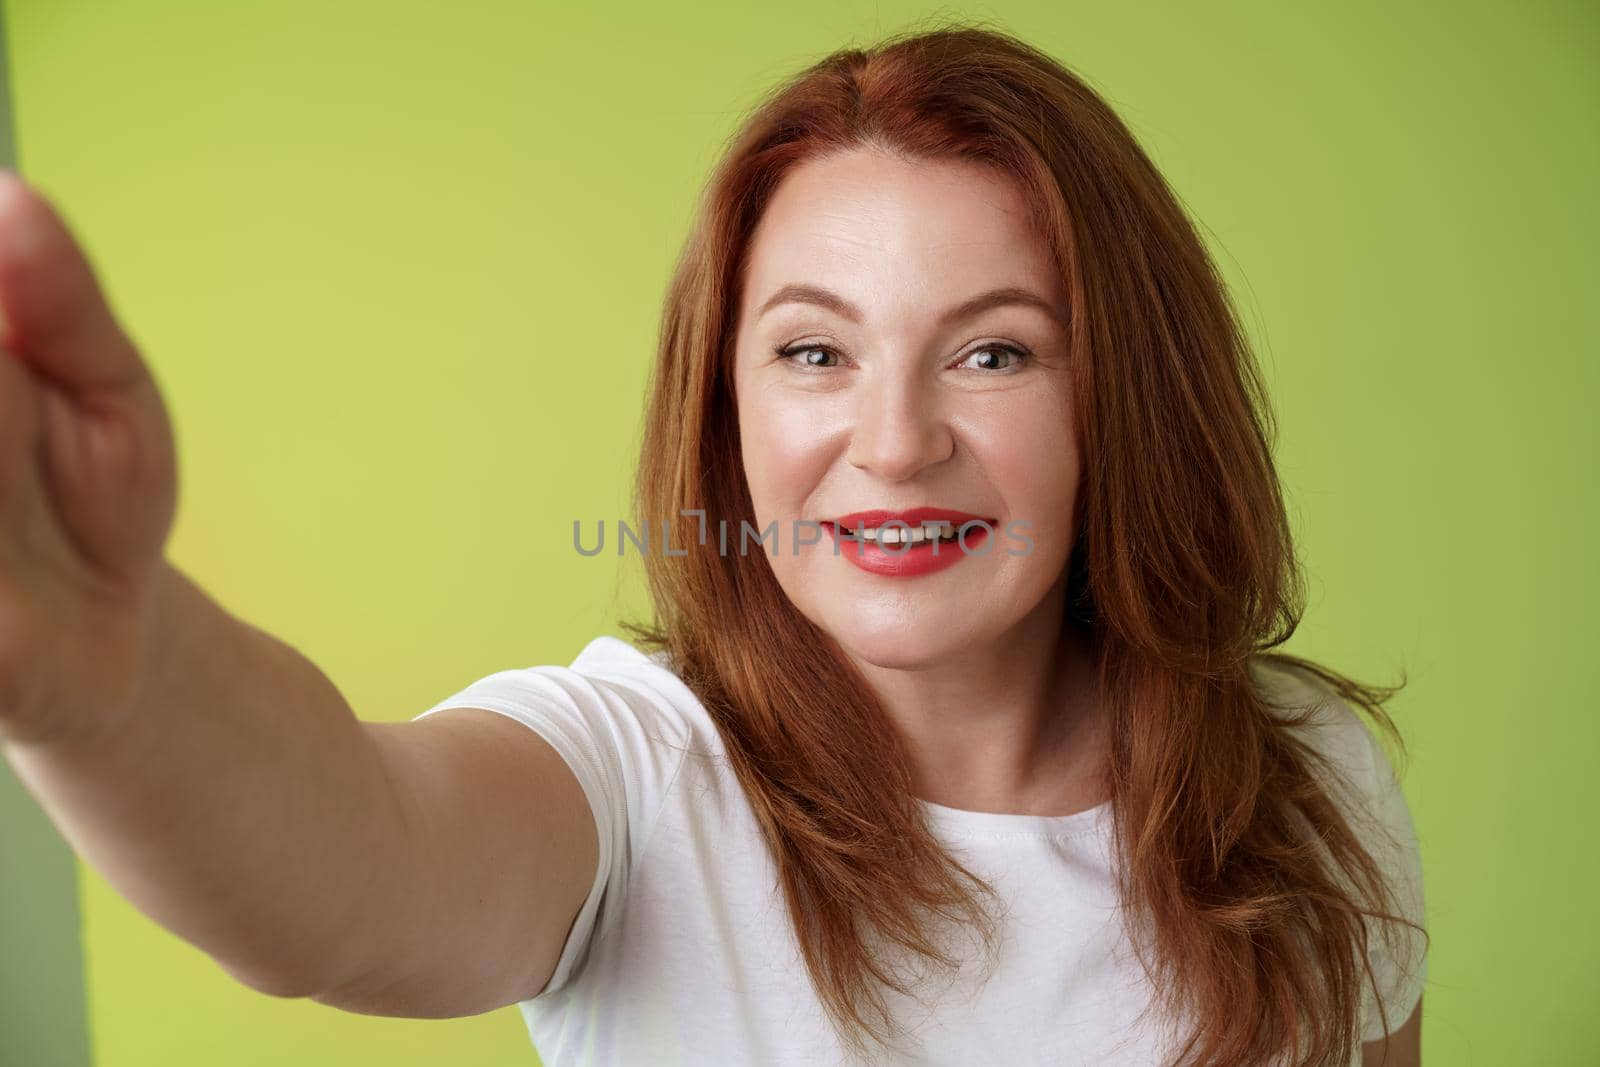 Close-up joyful enthusiastic redhead alluring middle-aged woman extand arm towards camera taking selfie smartphone smiling broadly posing photograph taking picture device green background.